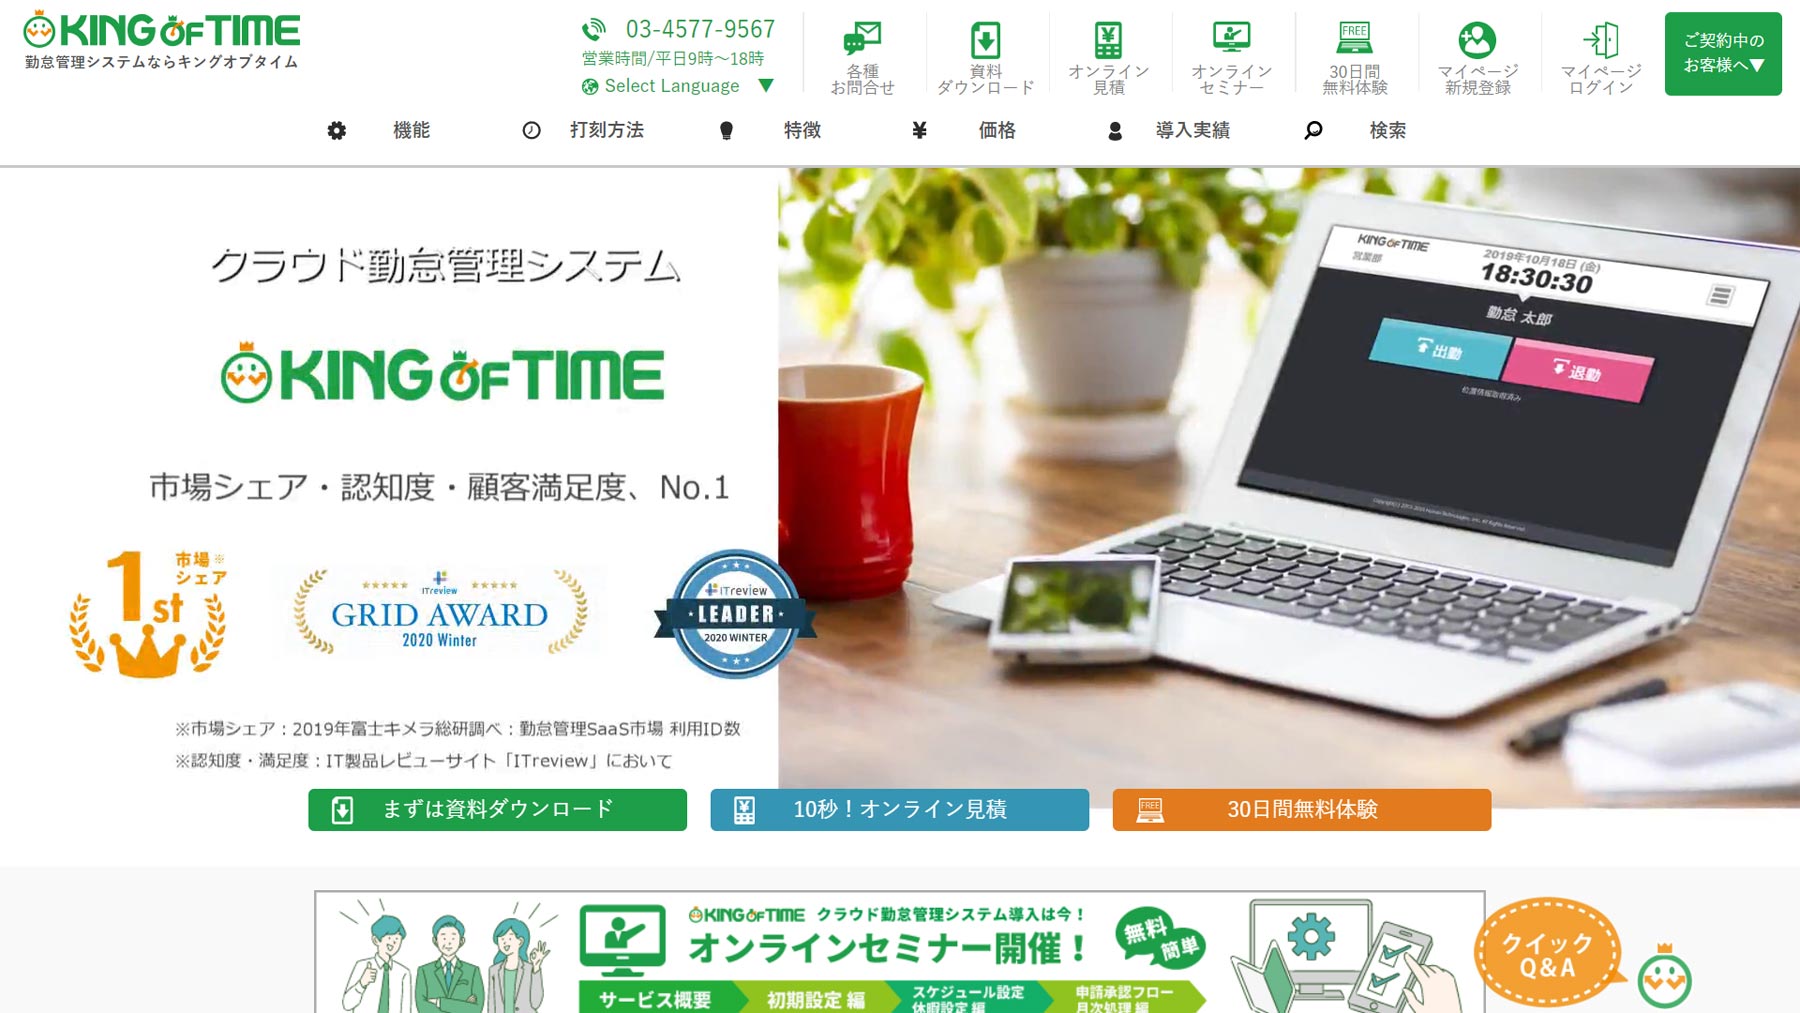 KING OF TIME公式Webサイト